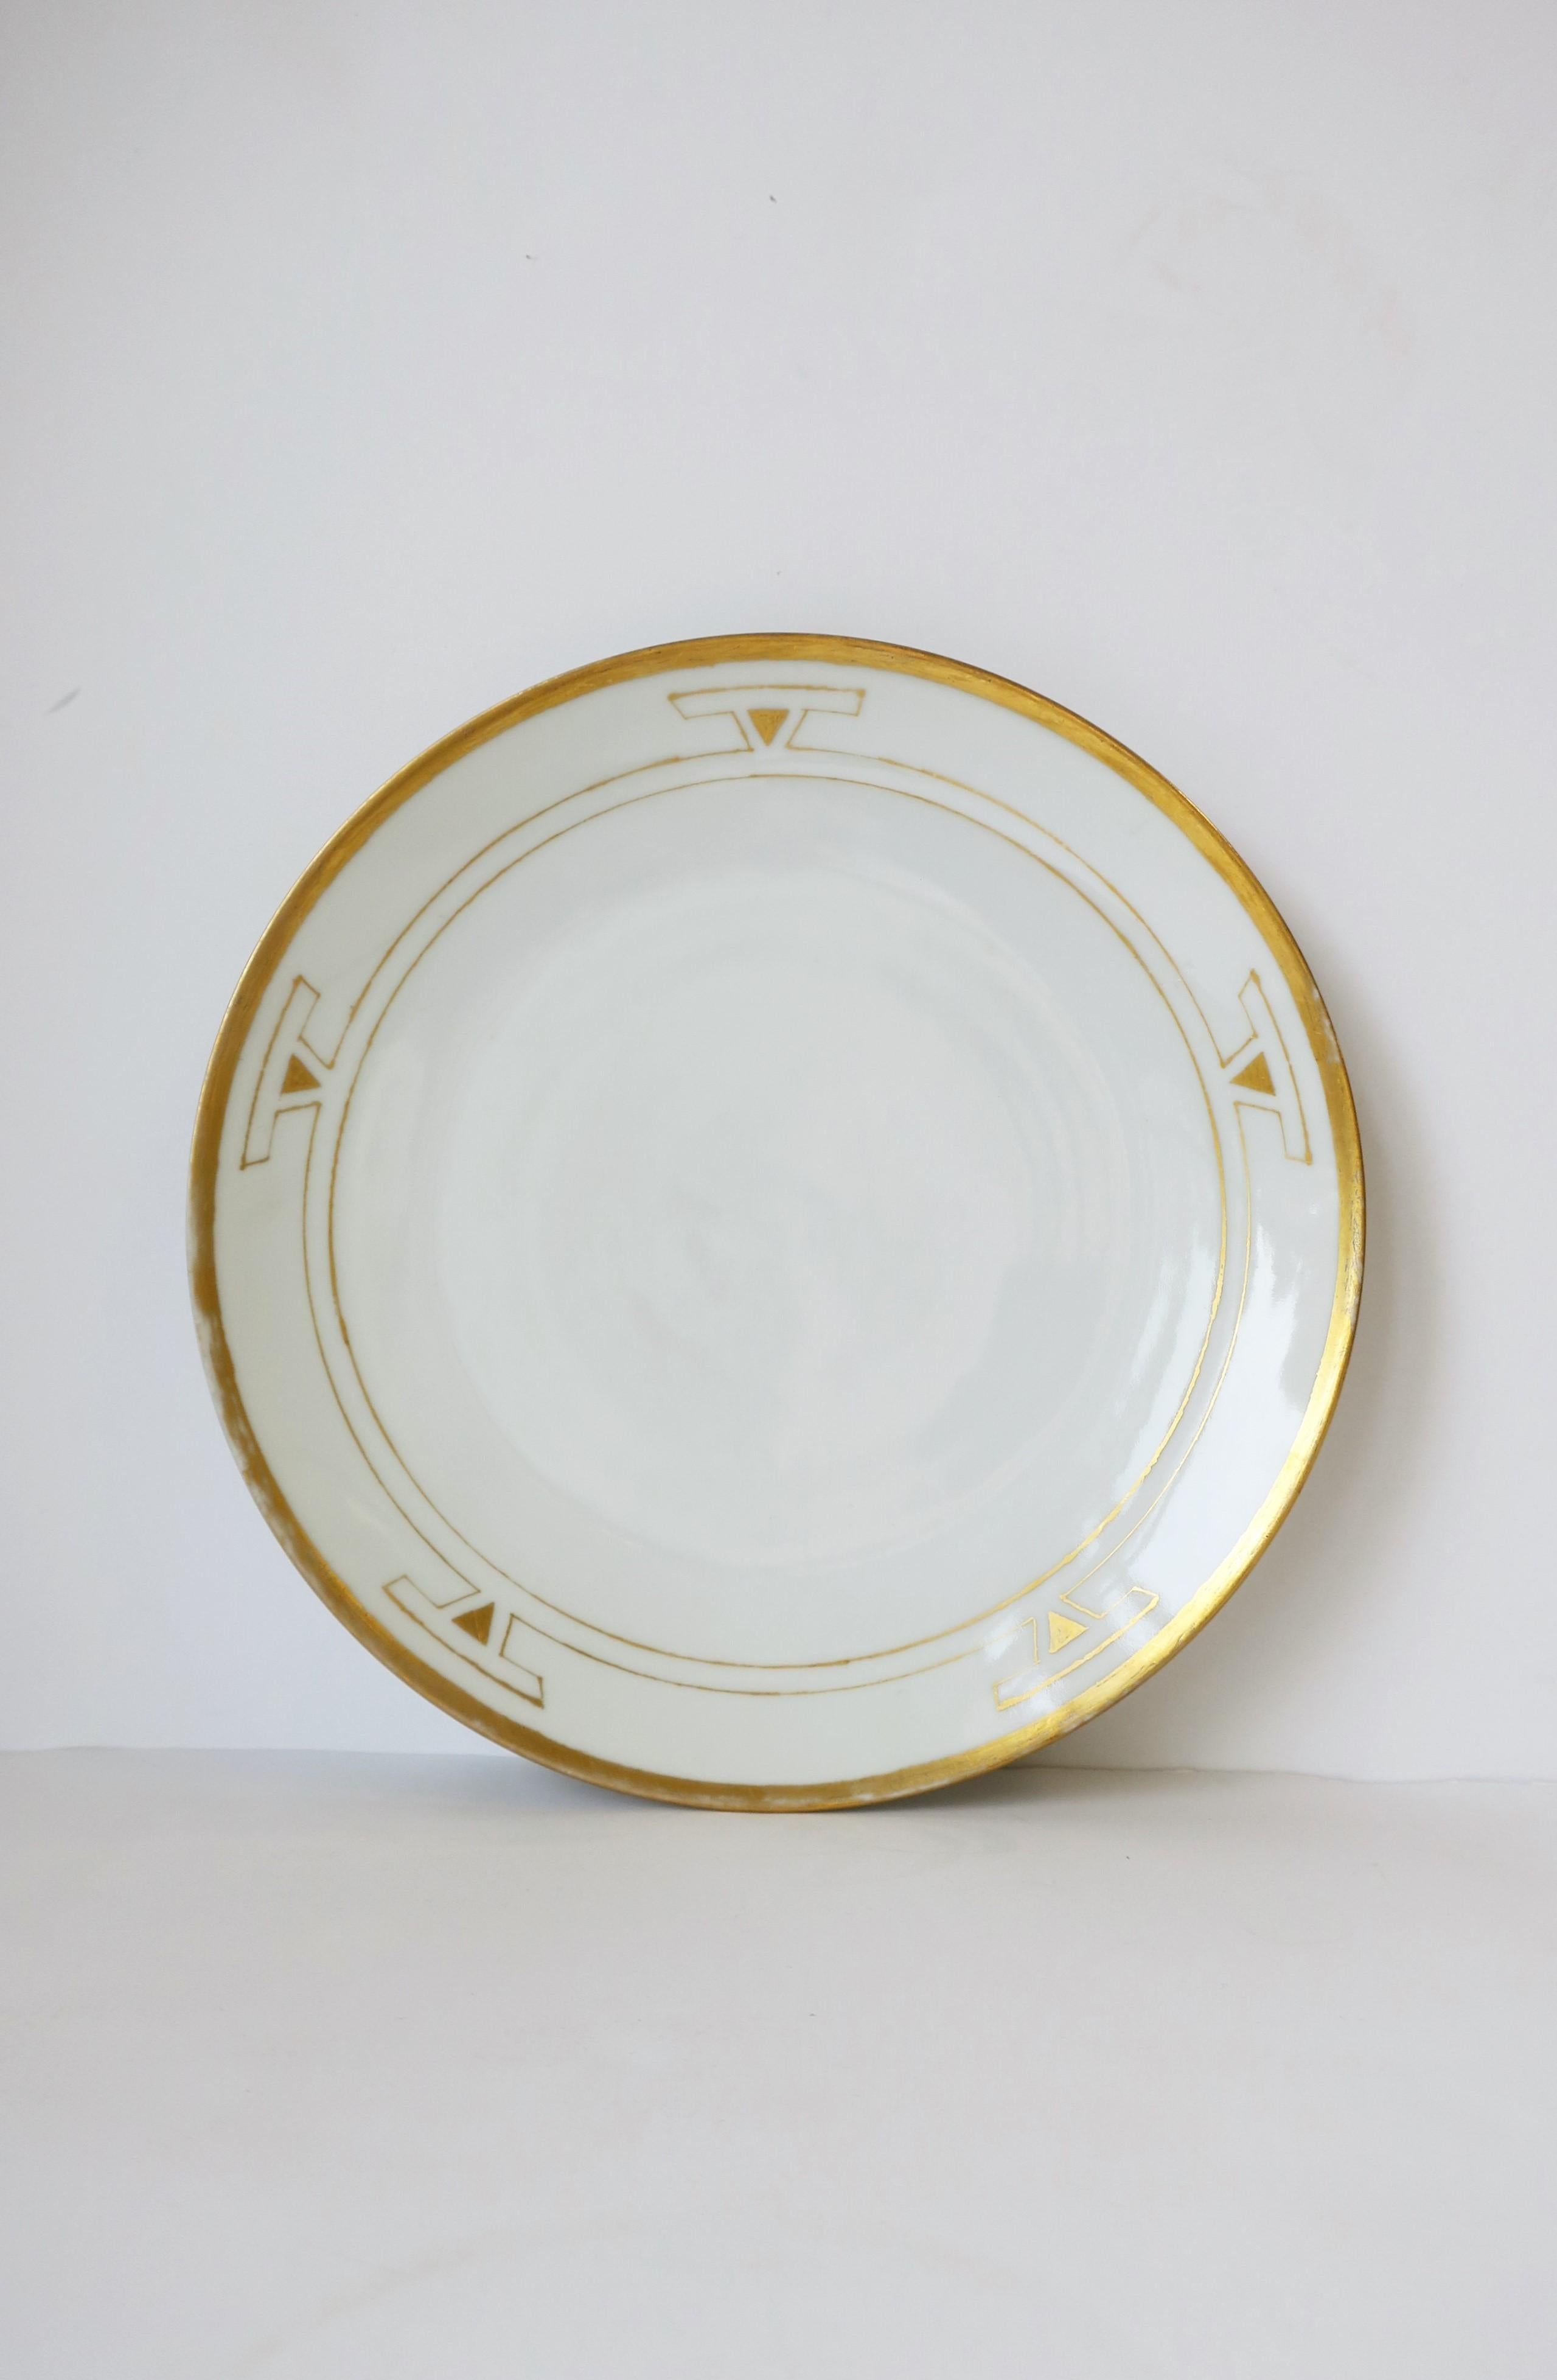 A beautiful German Art Deco period white and gold porcelain plate signed by artist for the Thomas Porcelain company, 1929, Germany. Dated by hand, 